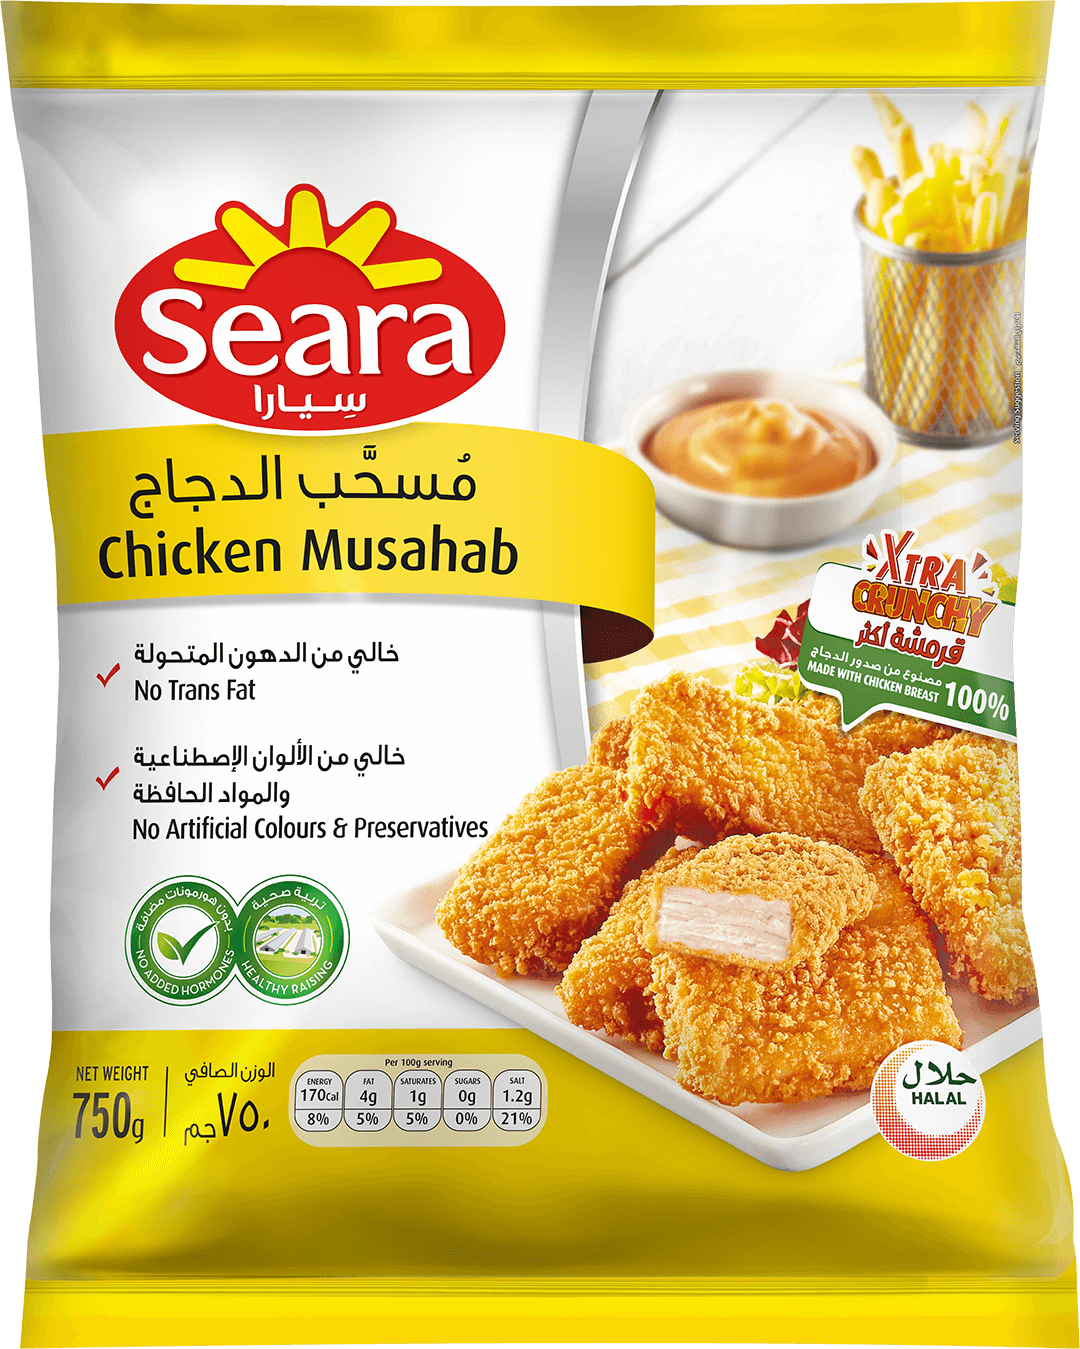 4.2.3.1-Seara-Chicken-Musahab-750g-Front.png